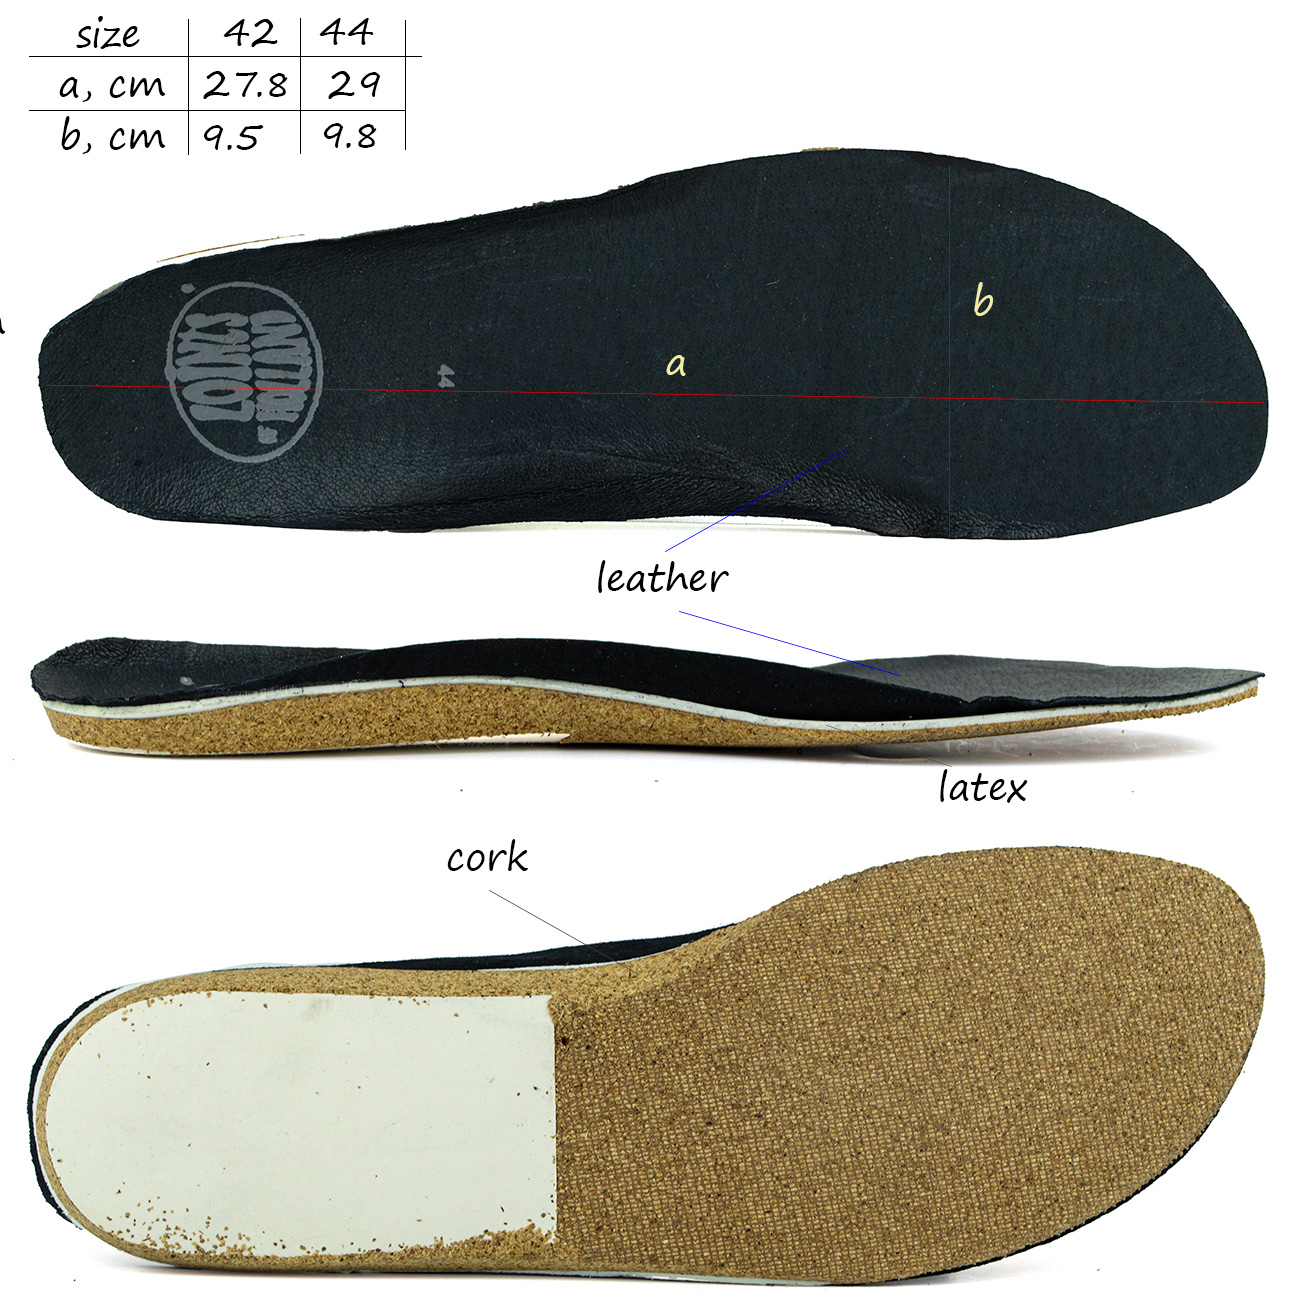 removable insole for men's shoes 41795